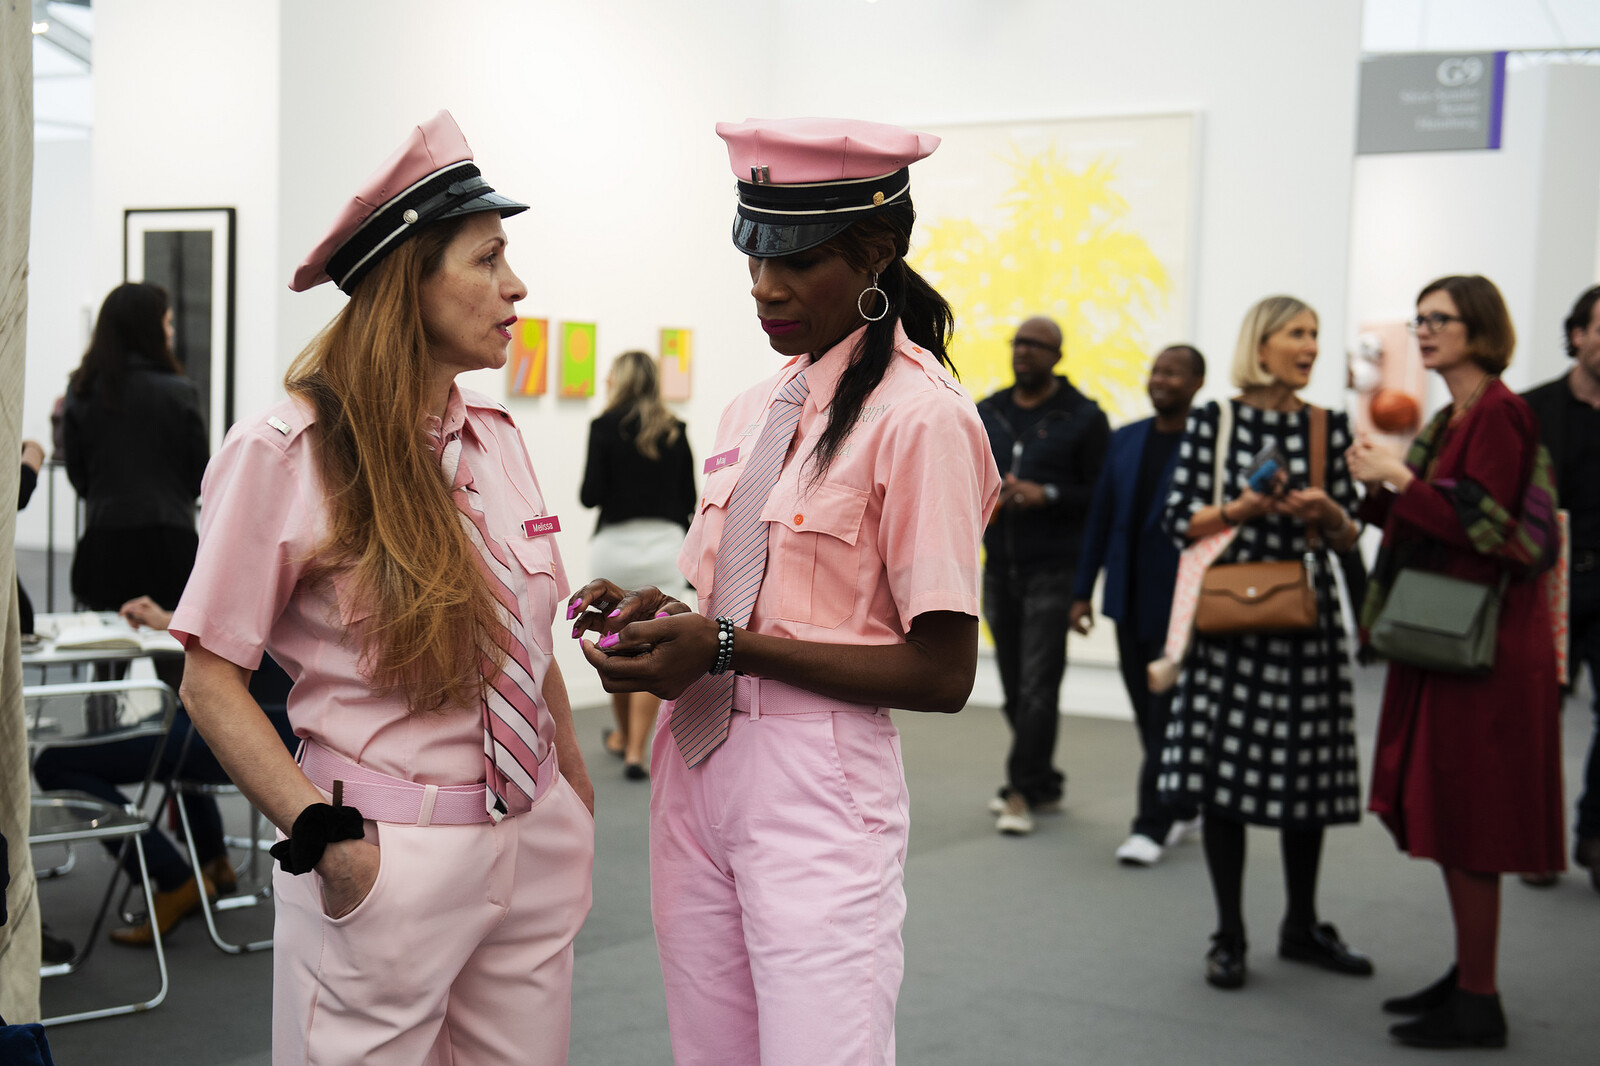 The Best Street Style From Frieze London 2019, The Journal